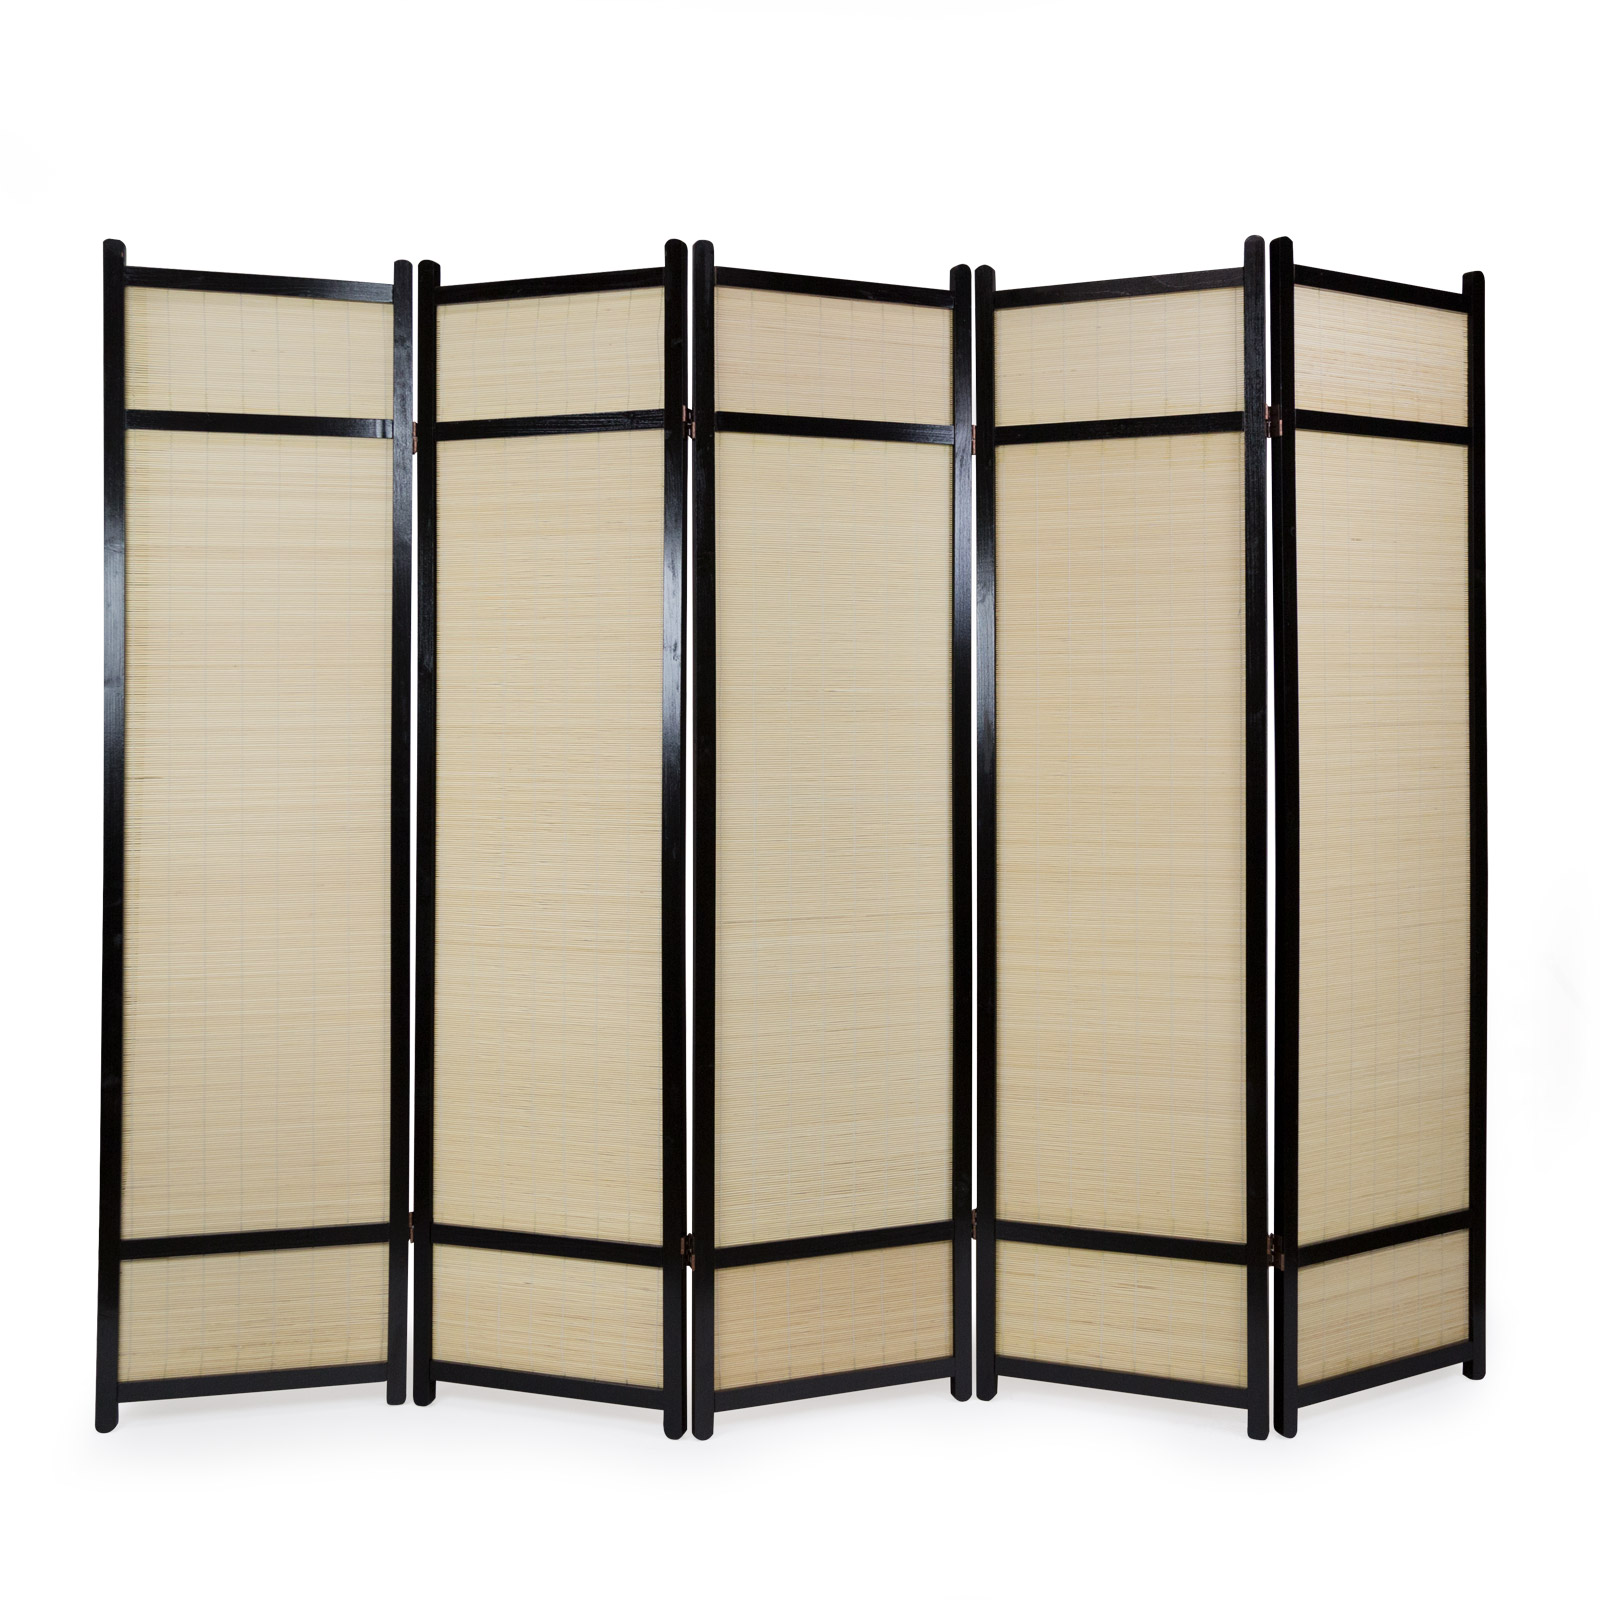 Paravent room divider 3 4 5 6 parts wood partition wall privacy screen natural